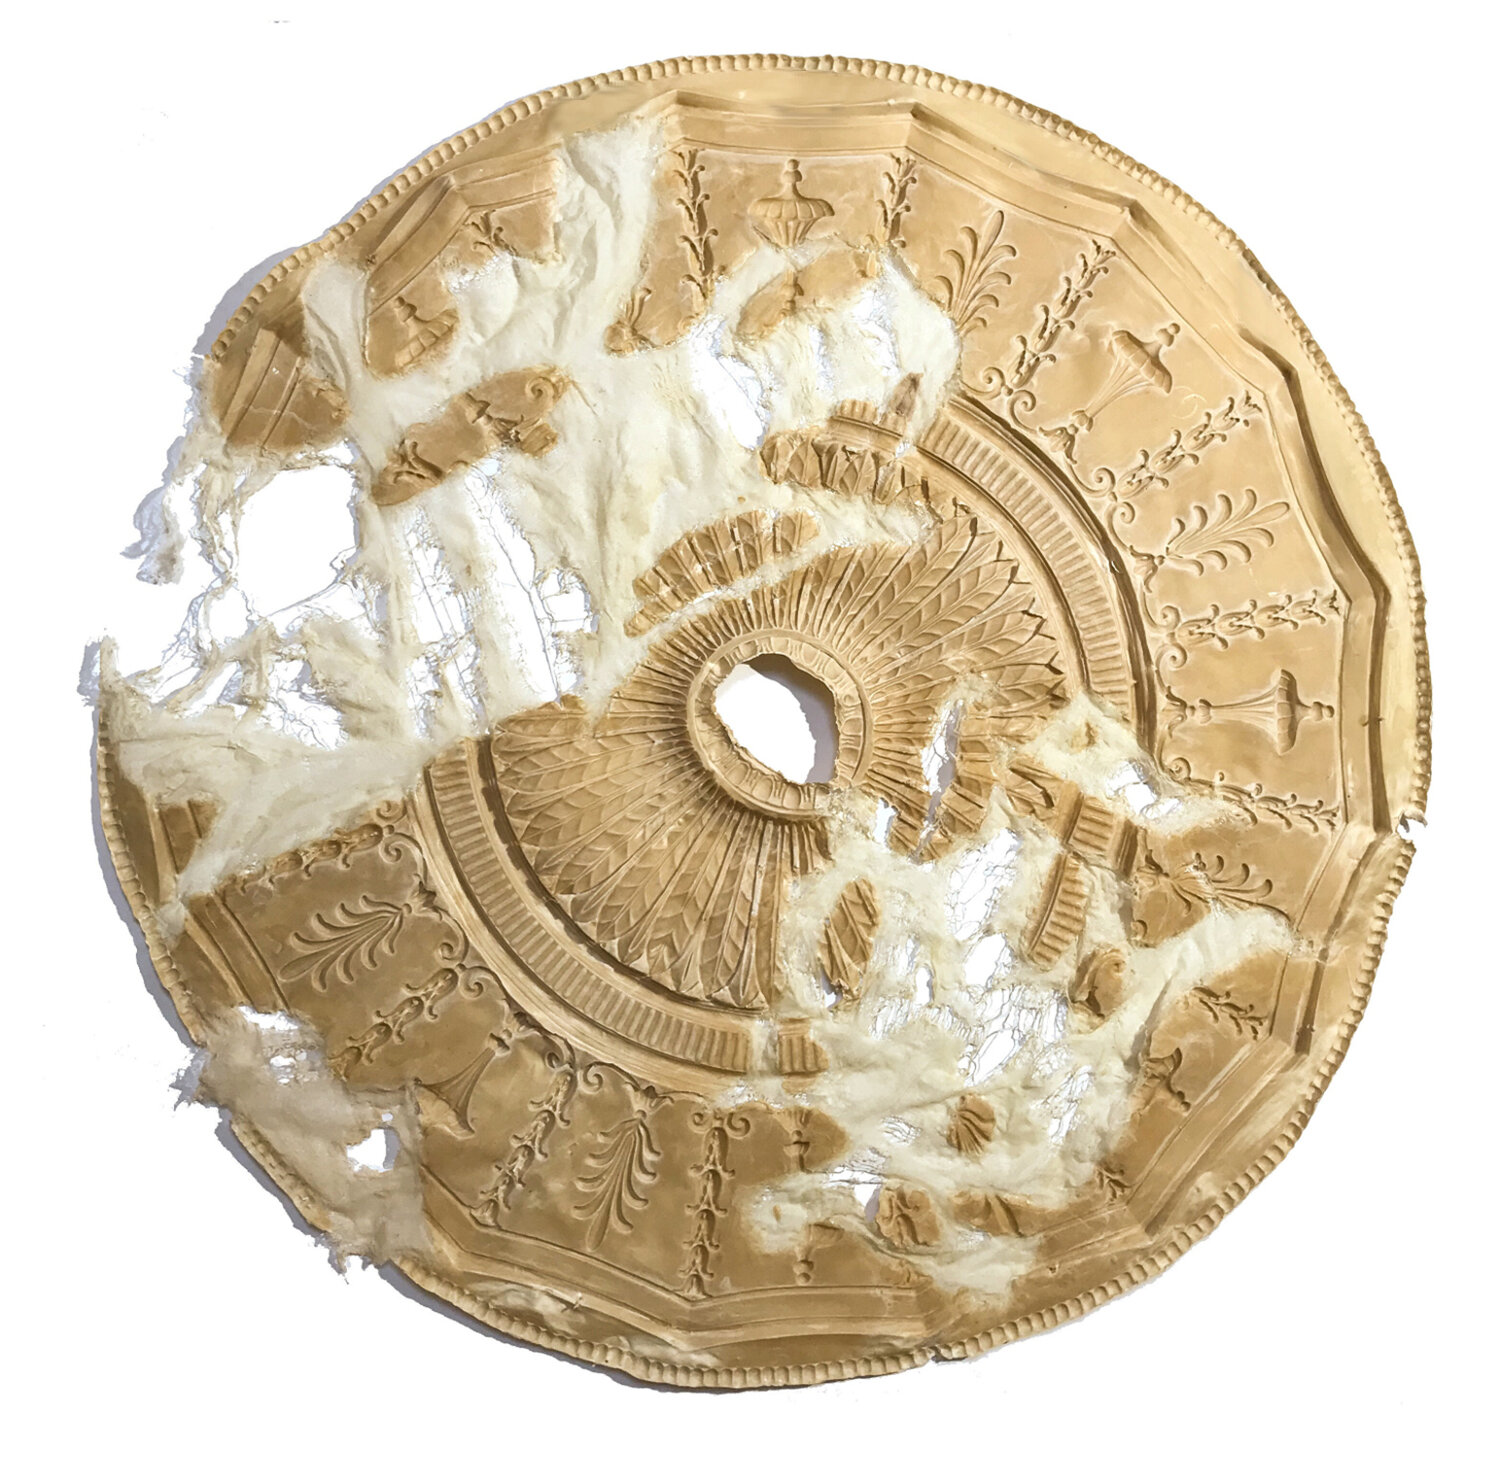   Carlie Trosclair  , Medallion IV , Latex and cheesecloth, 46 x 46 x 1 in., 2020 